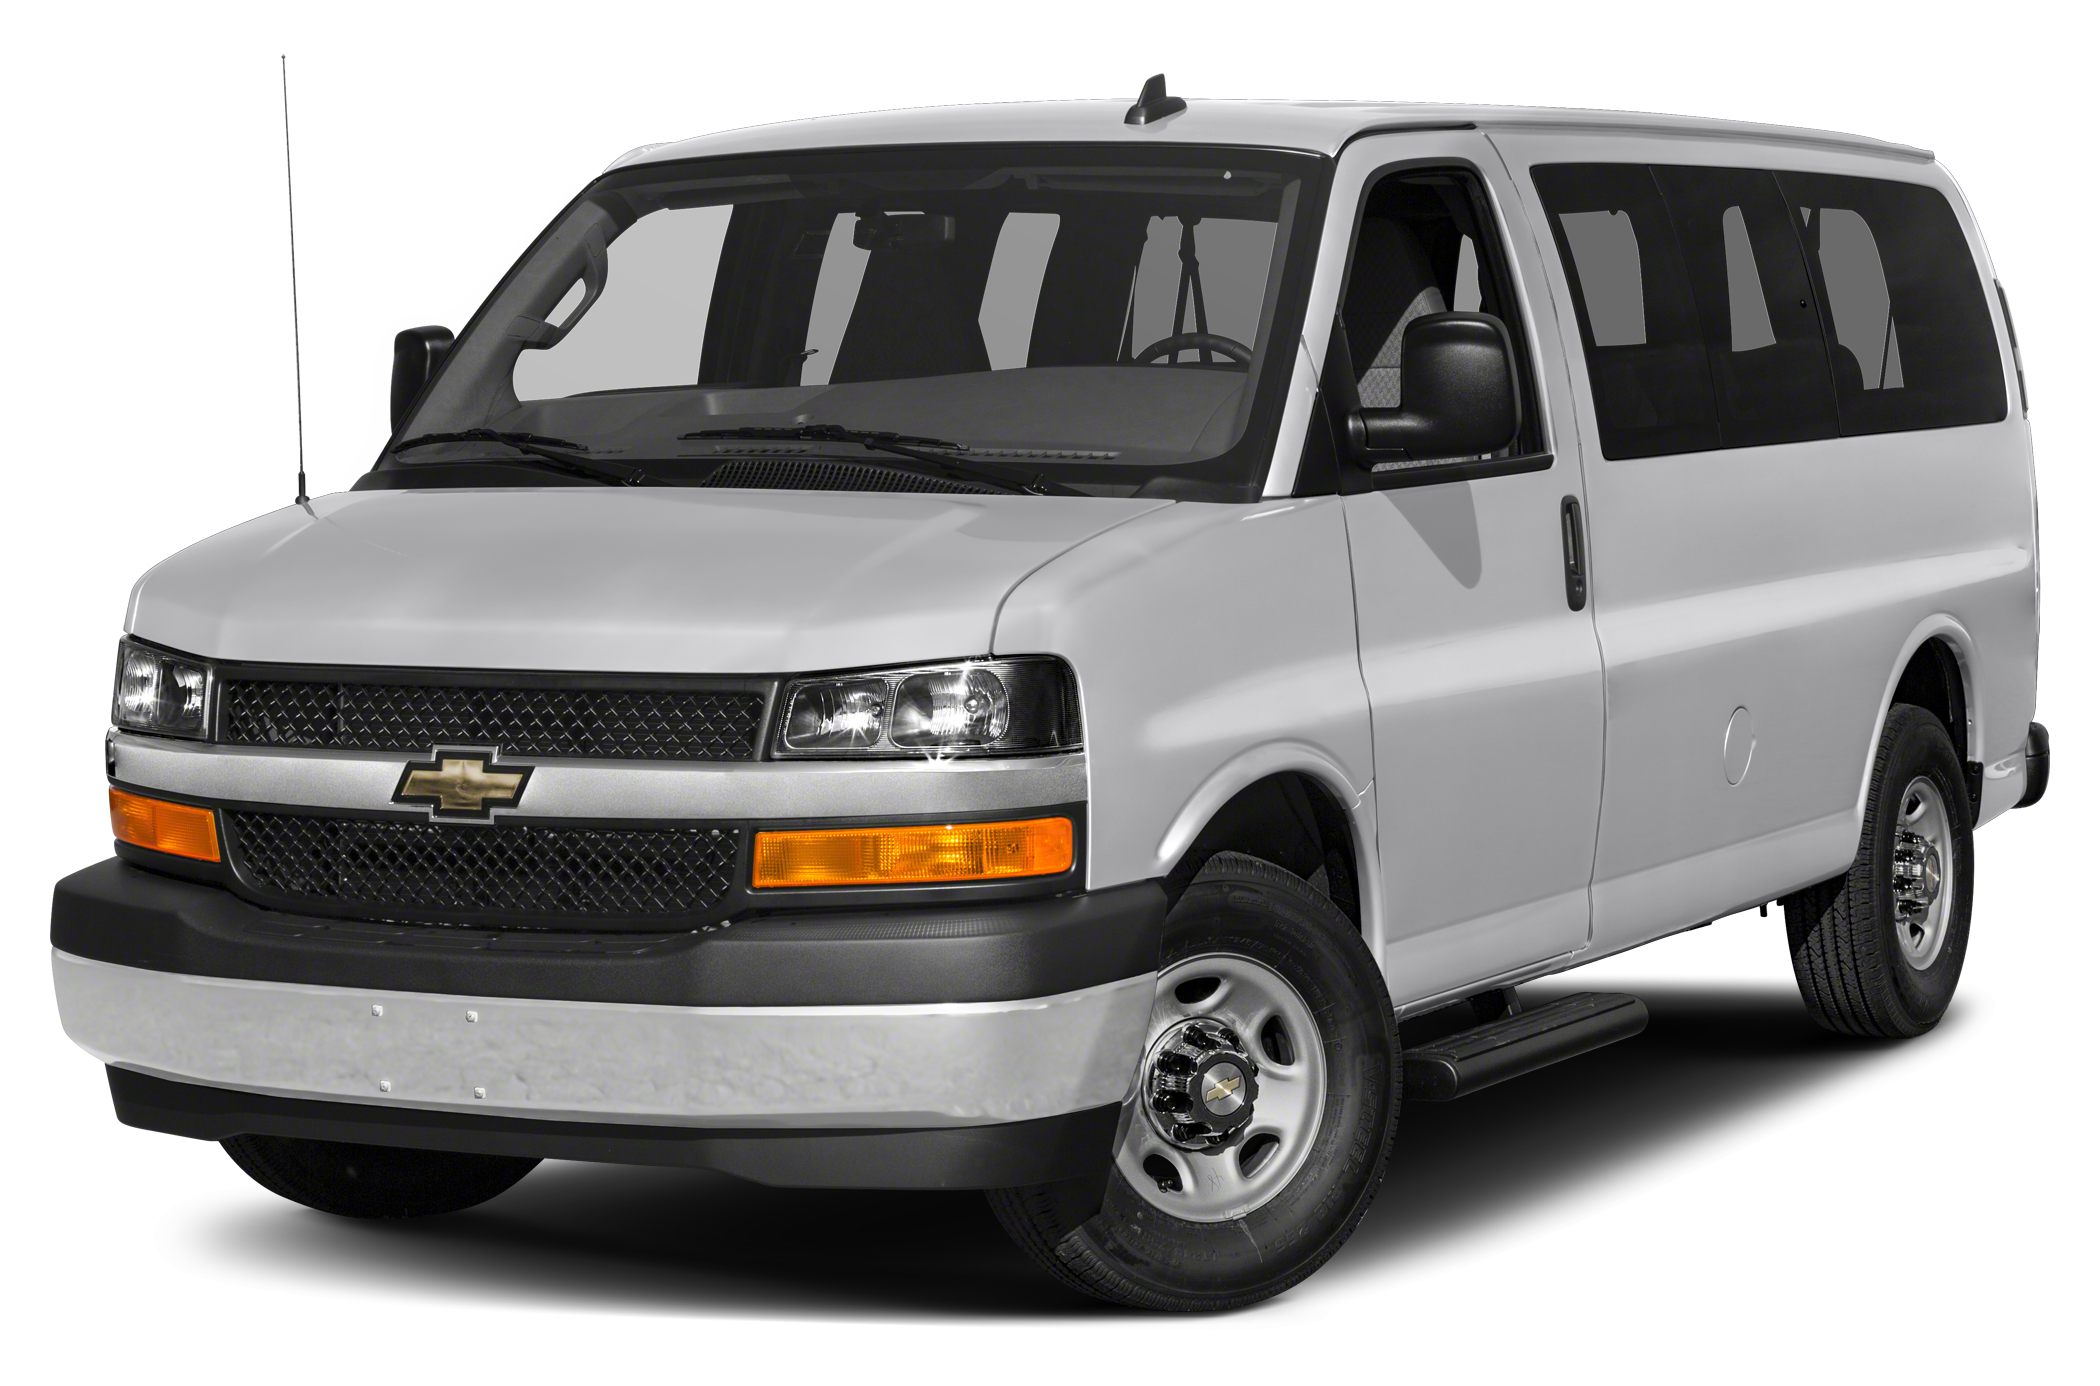 2017 Chevrolet Express 2500 Specs and 